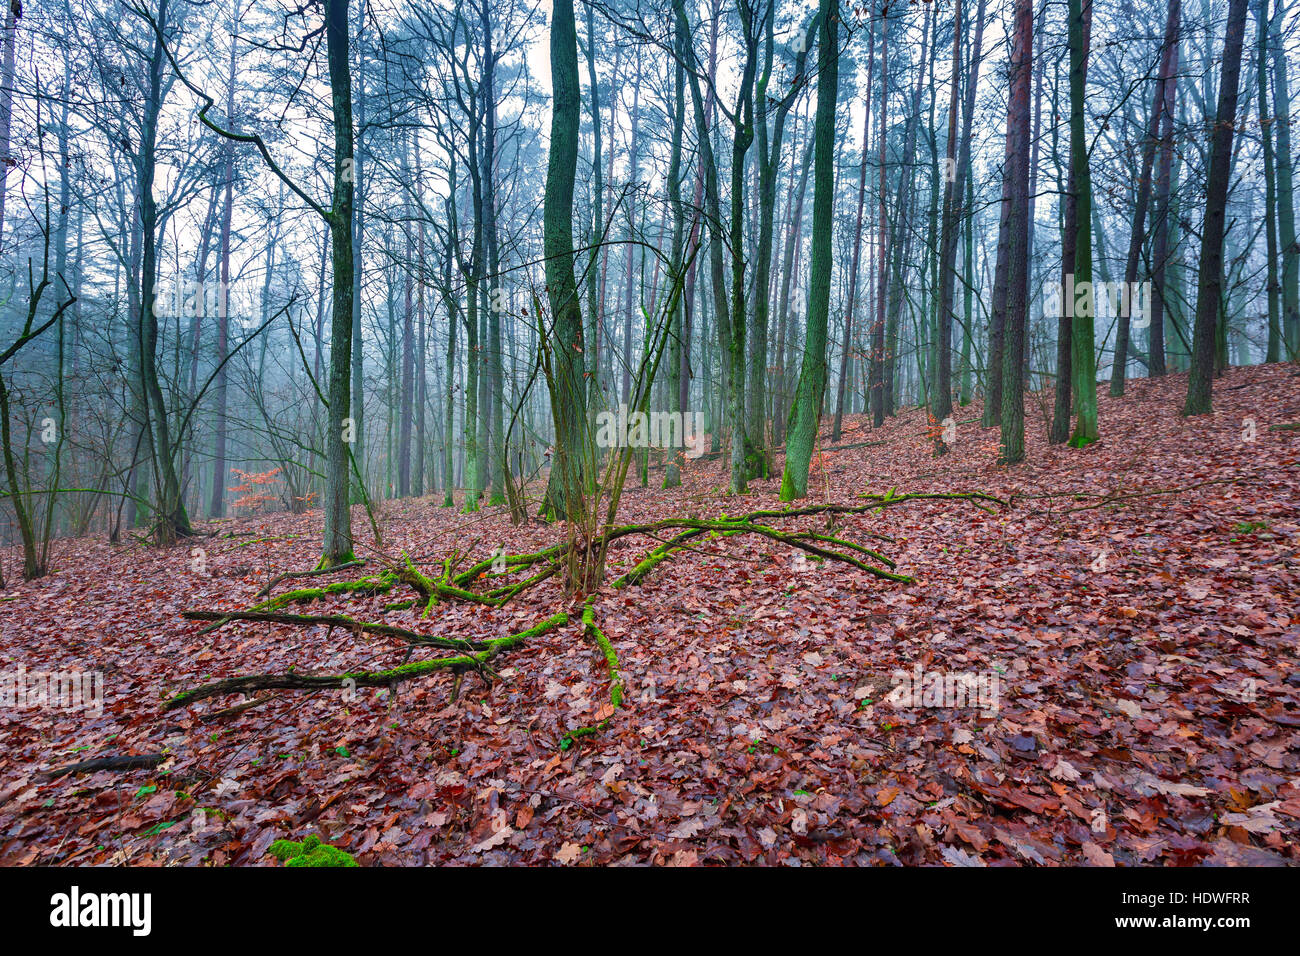 Beautiful autumnal forest landscape photographed at foggy day. Polish forest. Stock Photo